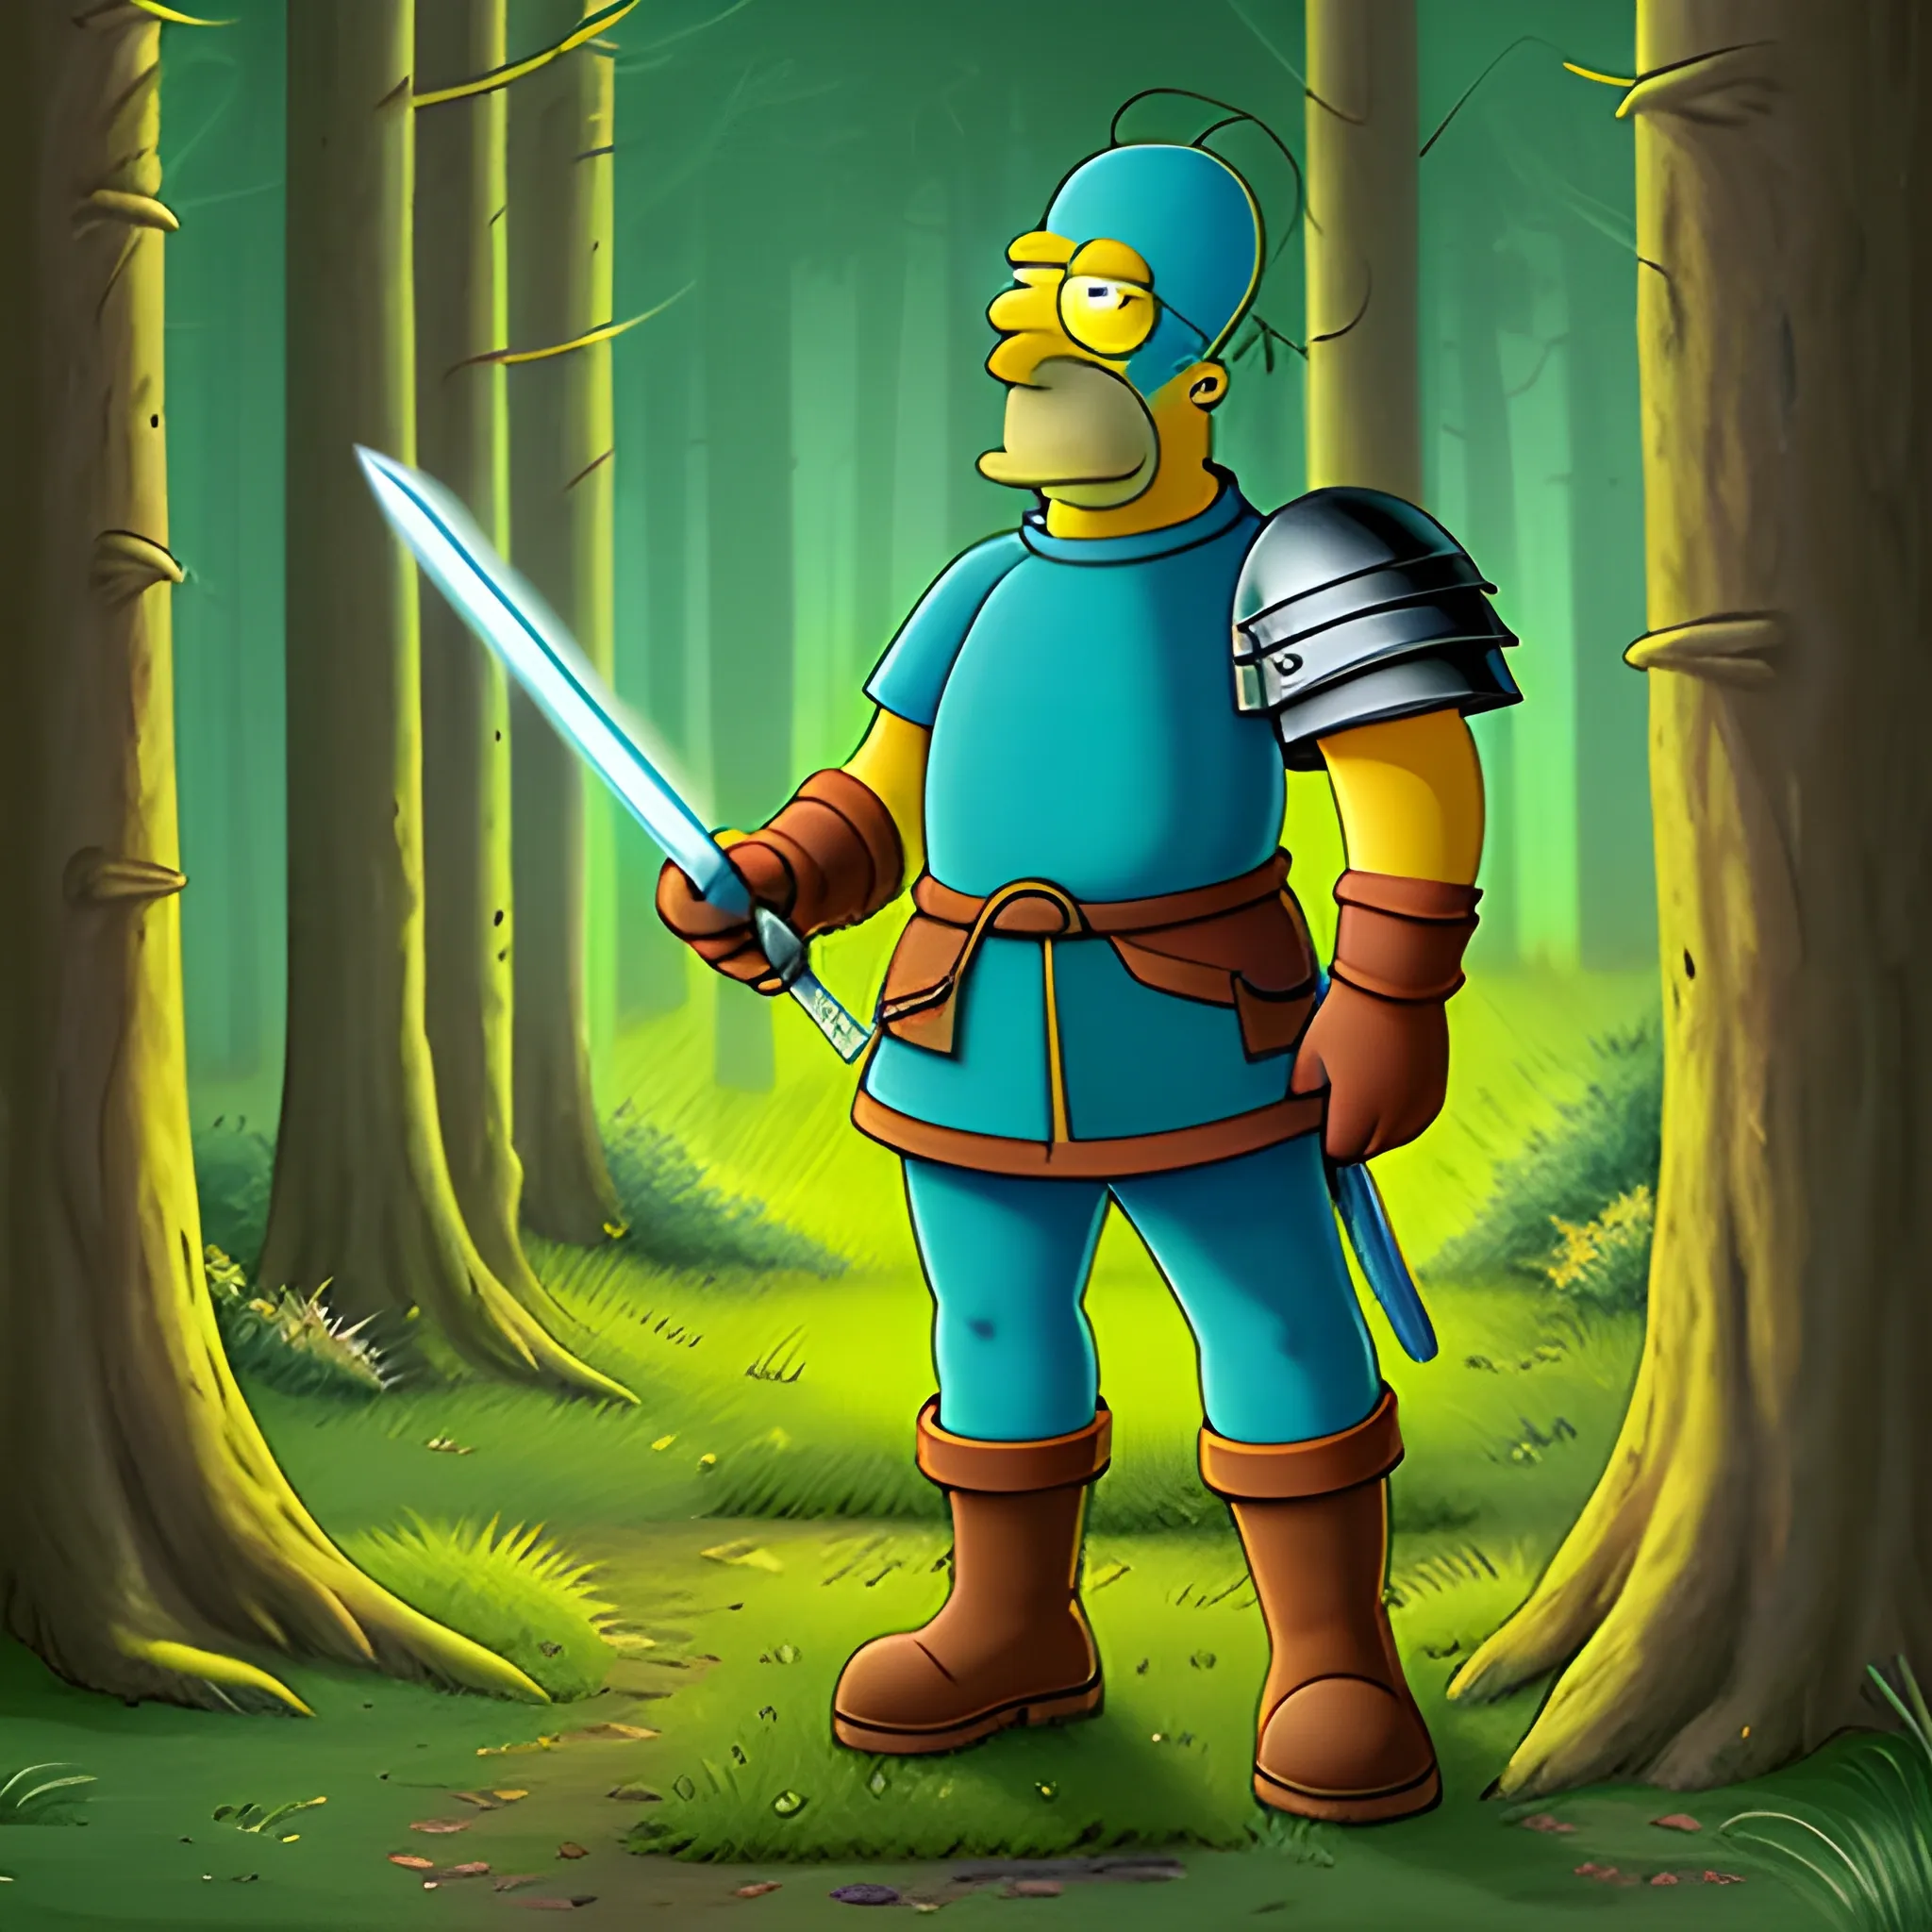 Homer Simpson, standing on a forest path, which is covered with grass and trees at the edges, he is dressed in dark green boots, the clothes of an ancient sorcerer and holds a magic wand that glows with a blue light, fighting with other knight with a sword